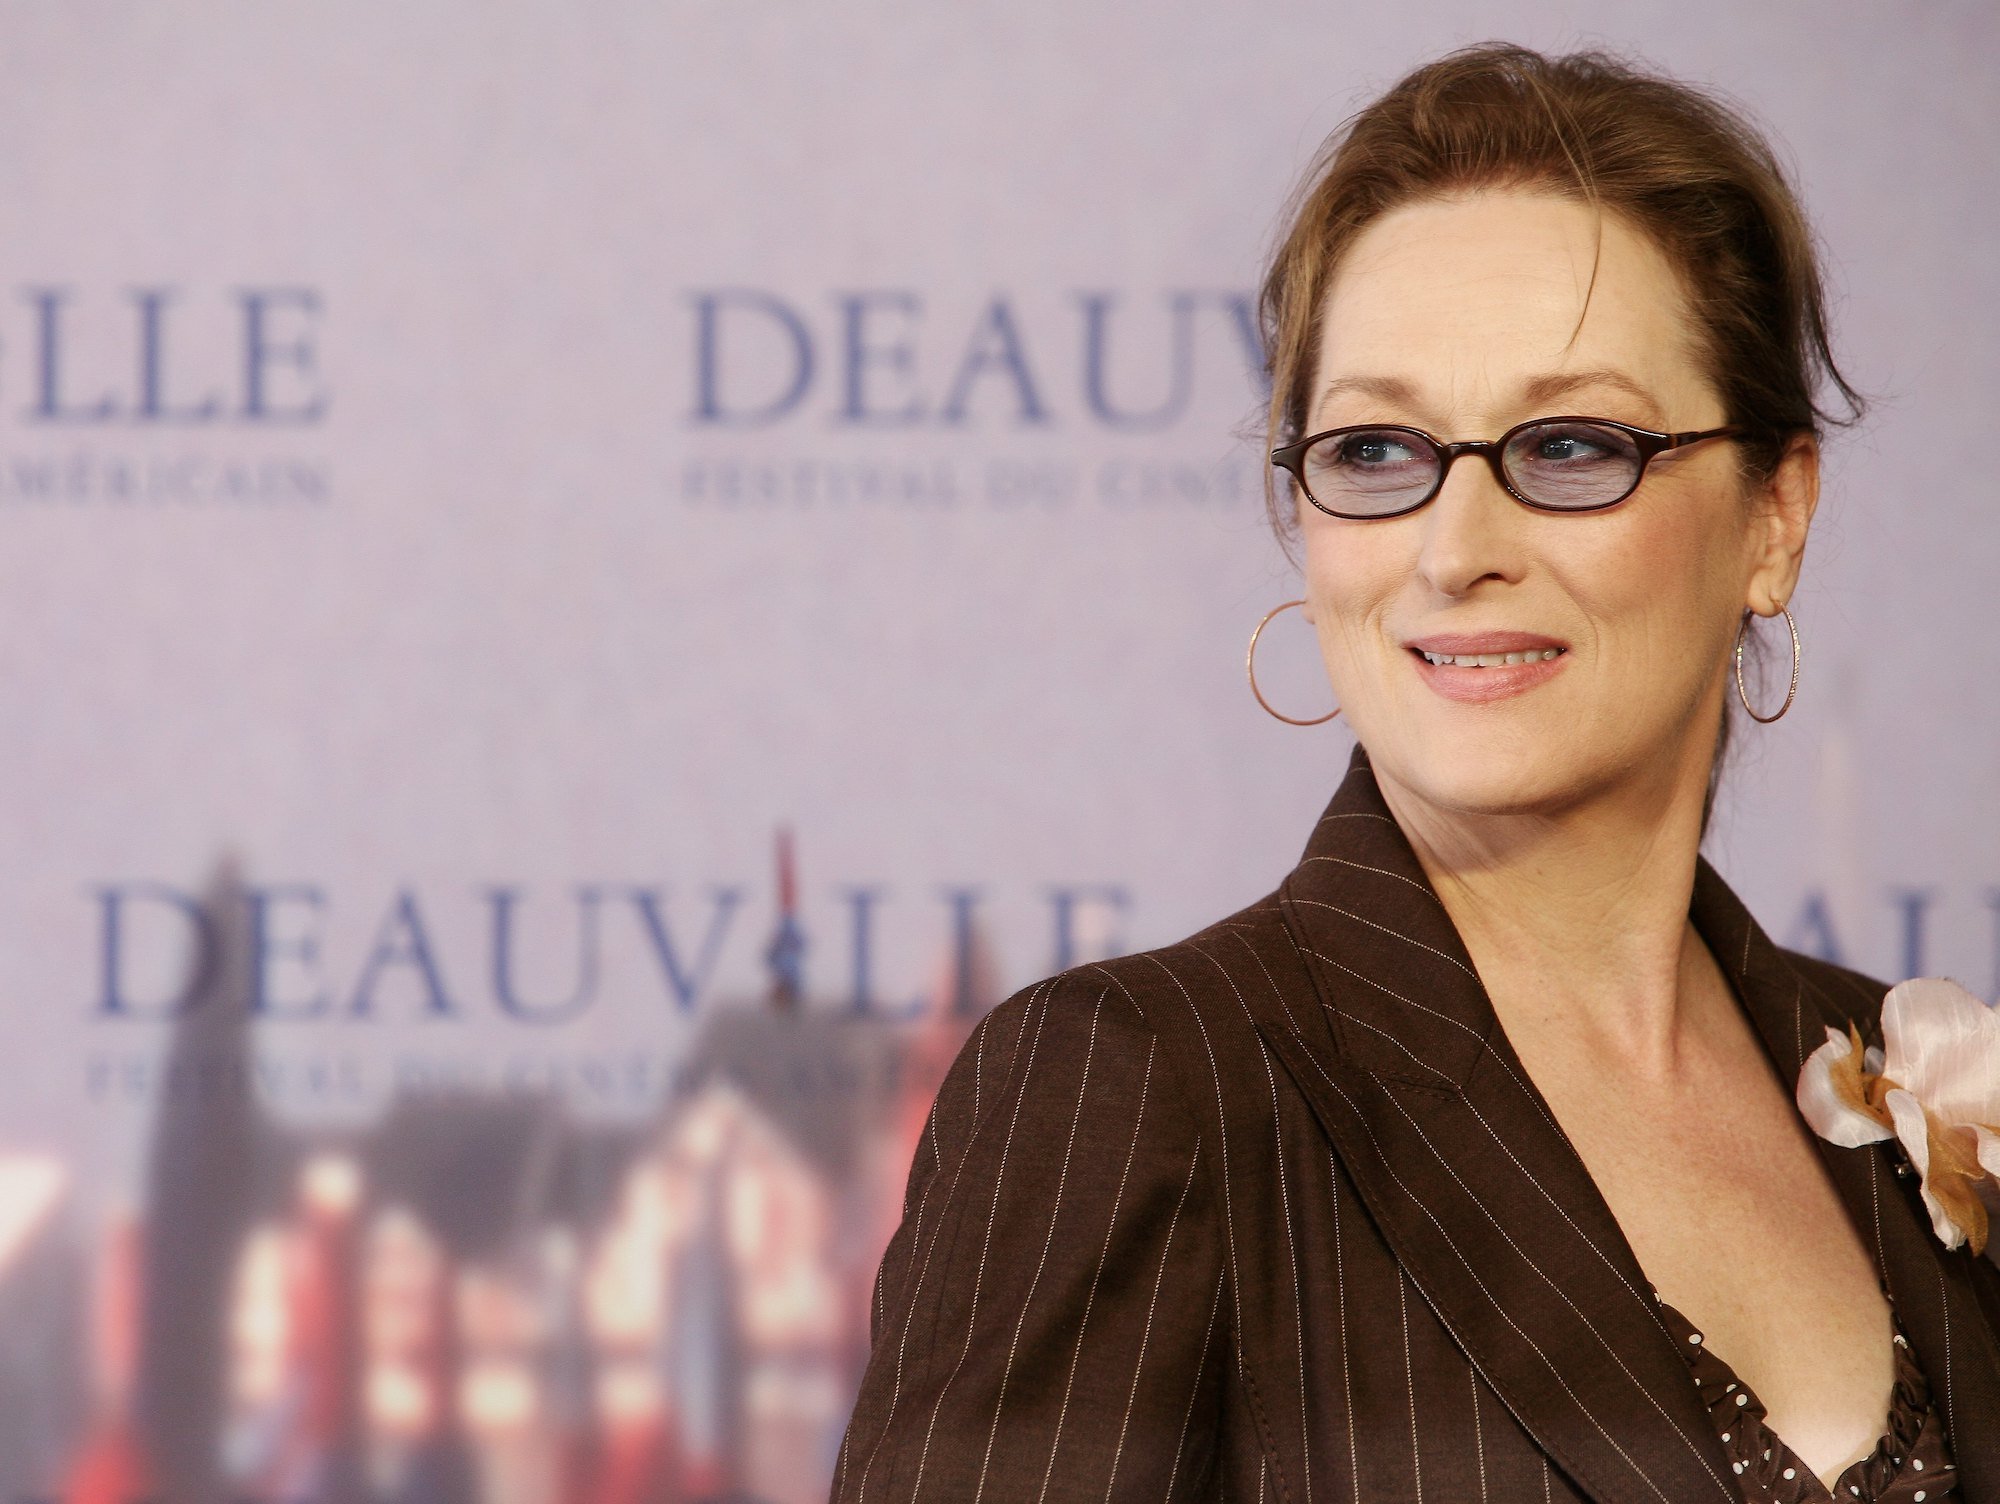 Meryl Streep poses at the photocall for The Devil wears Prada at the 32nd Deauville Festival Of American Film on September 9, 2006 in Deauville, France.